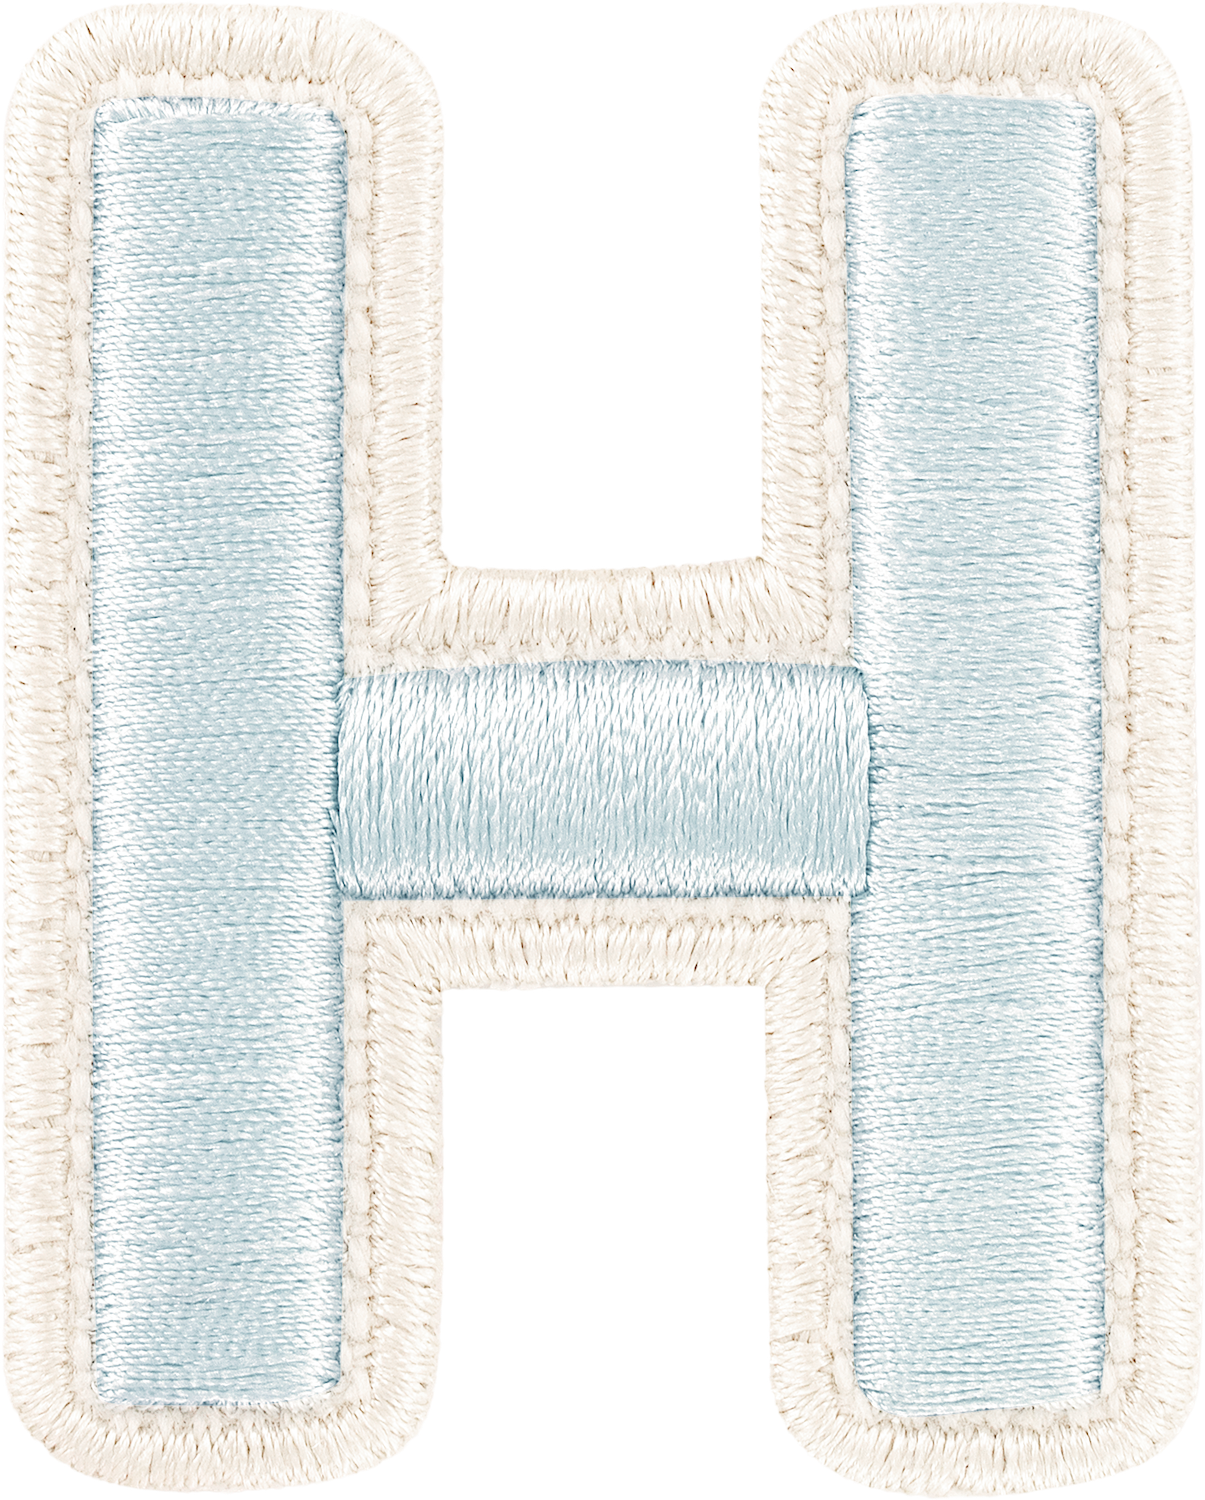 Sky Rolled Embroidery Letter Patches